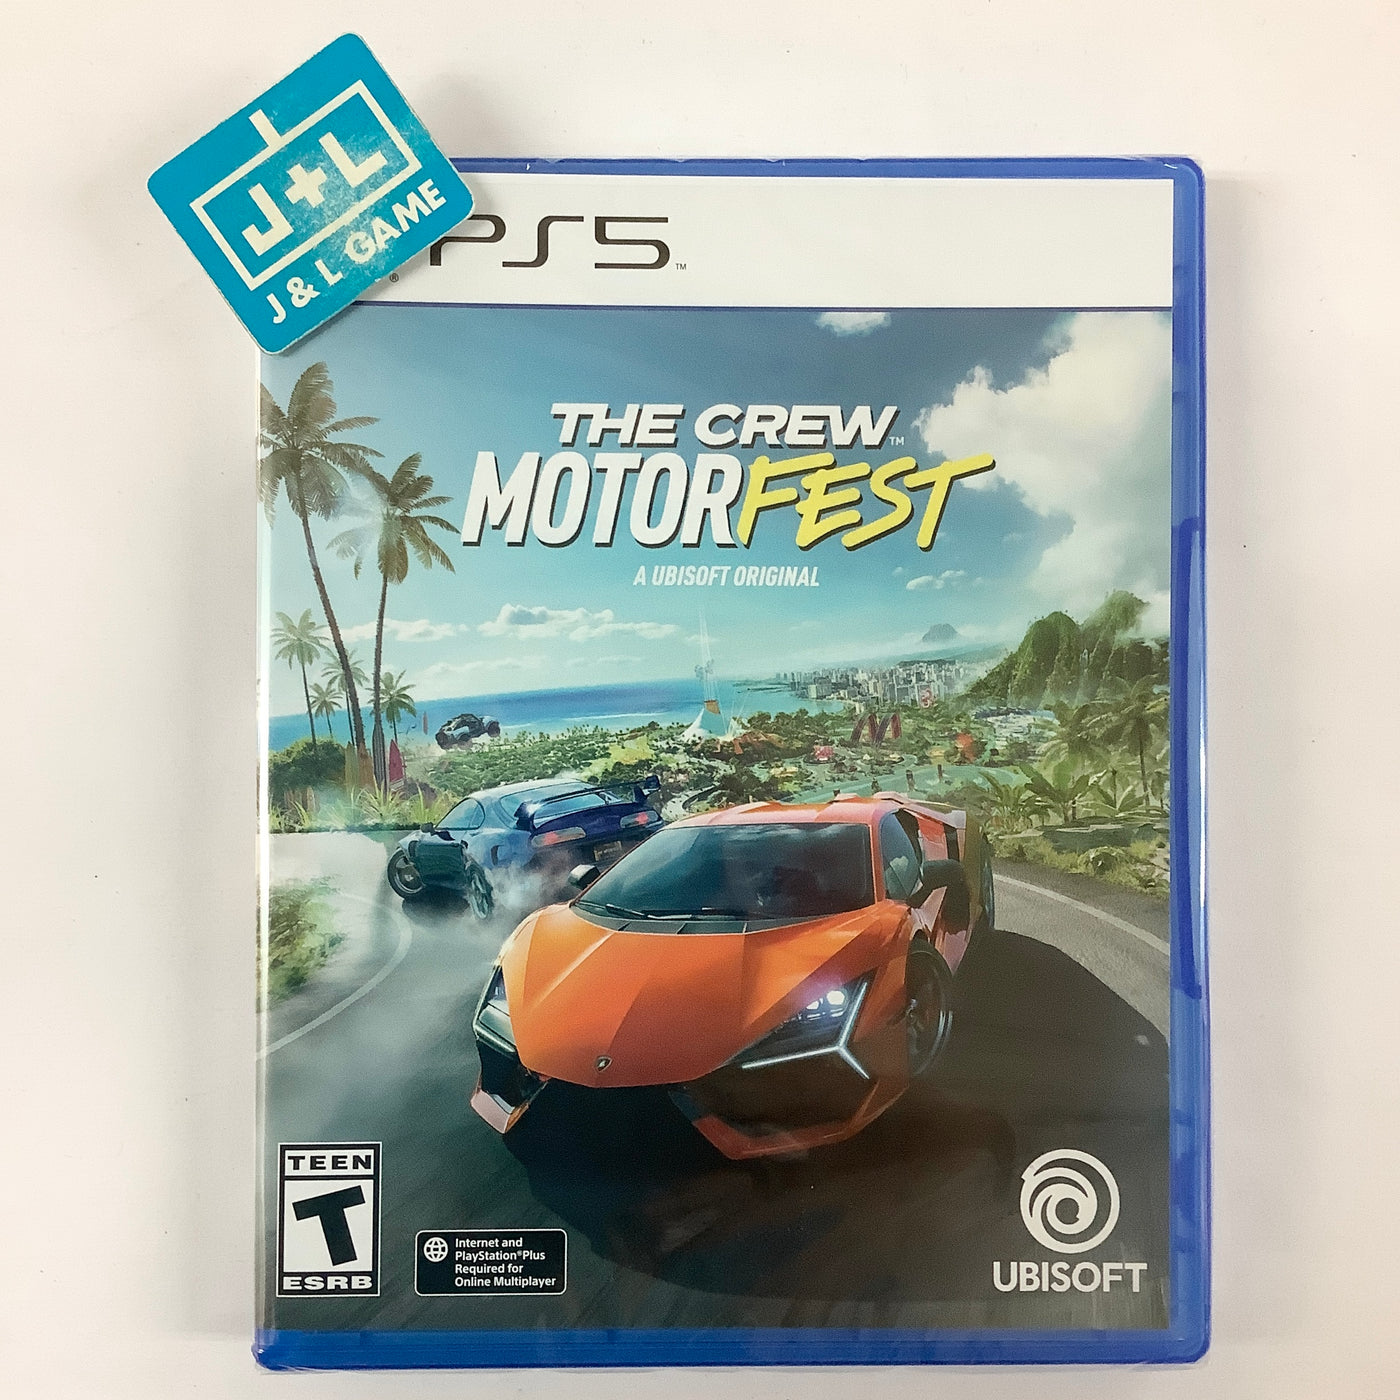 The Crew Game | Motorfest PlayStation J&L (PS5) 5 